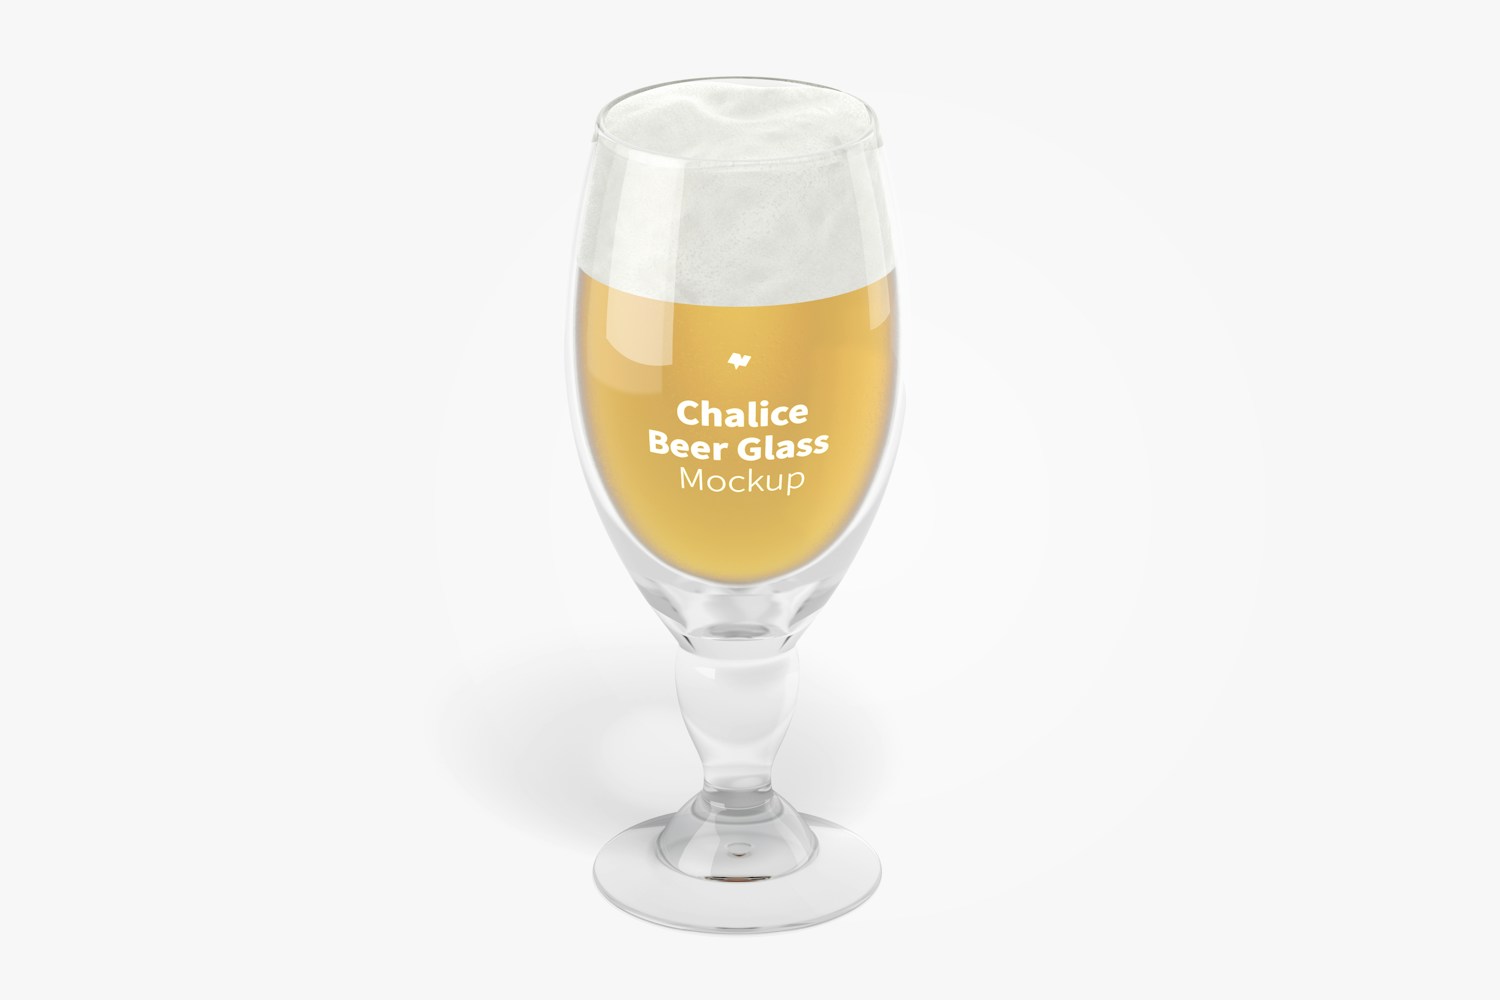 Chalice Beer Glass Mockup, Front View